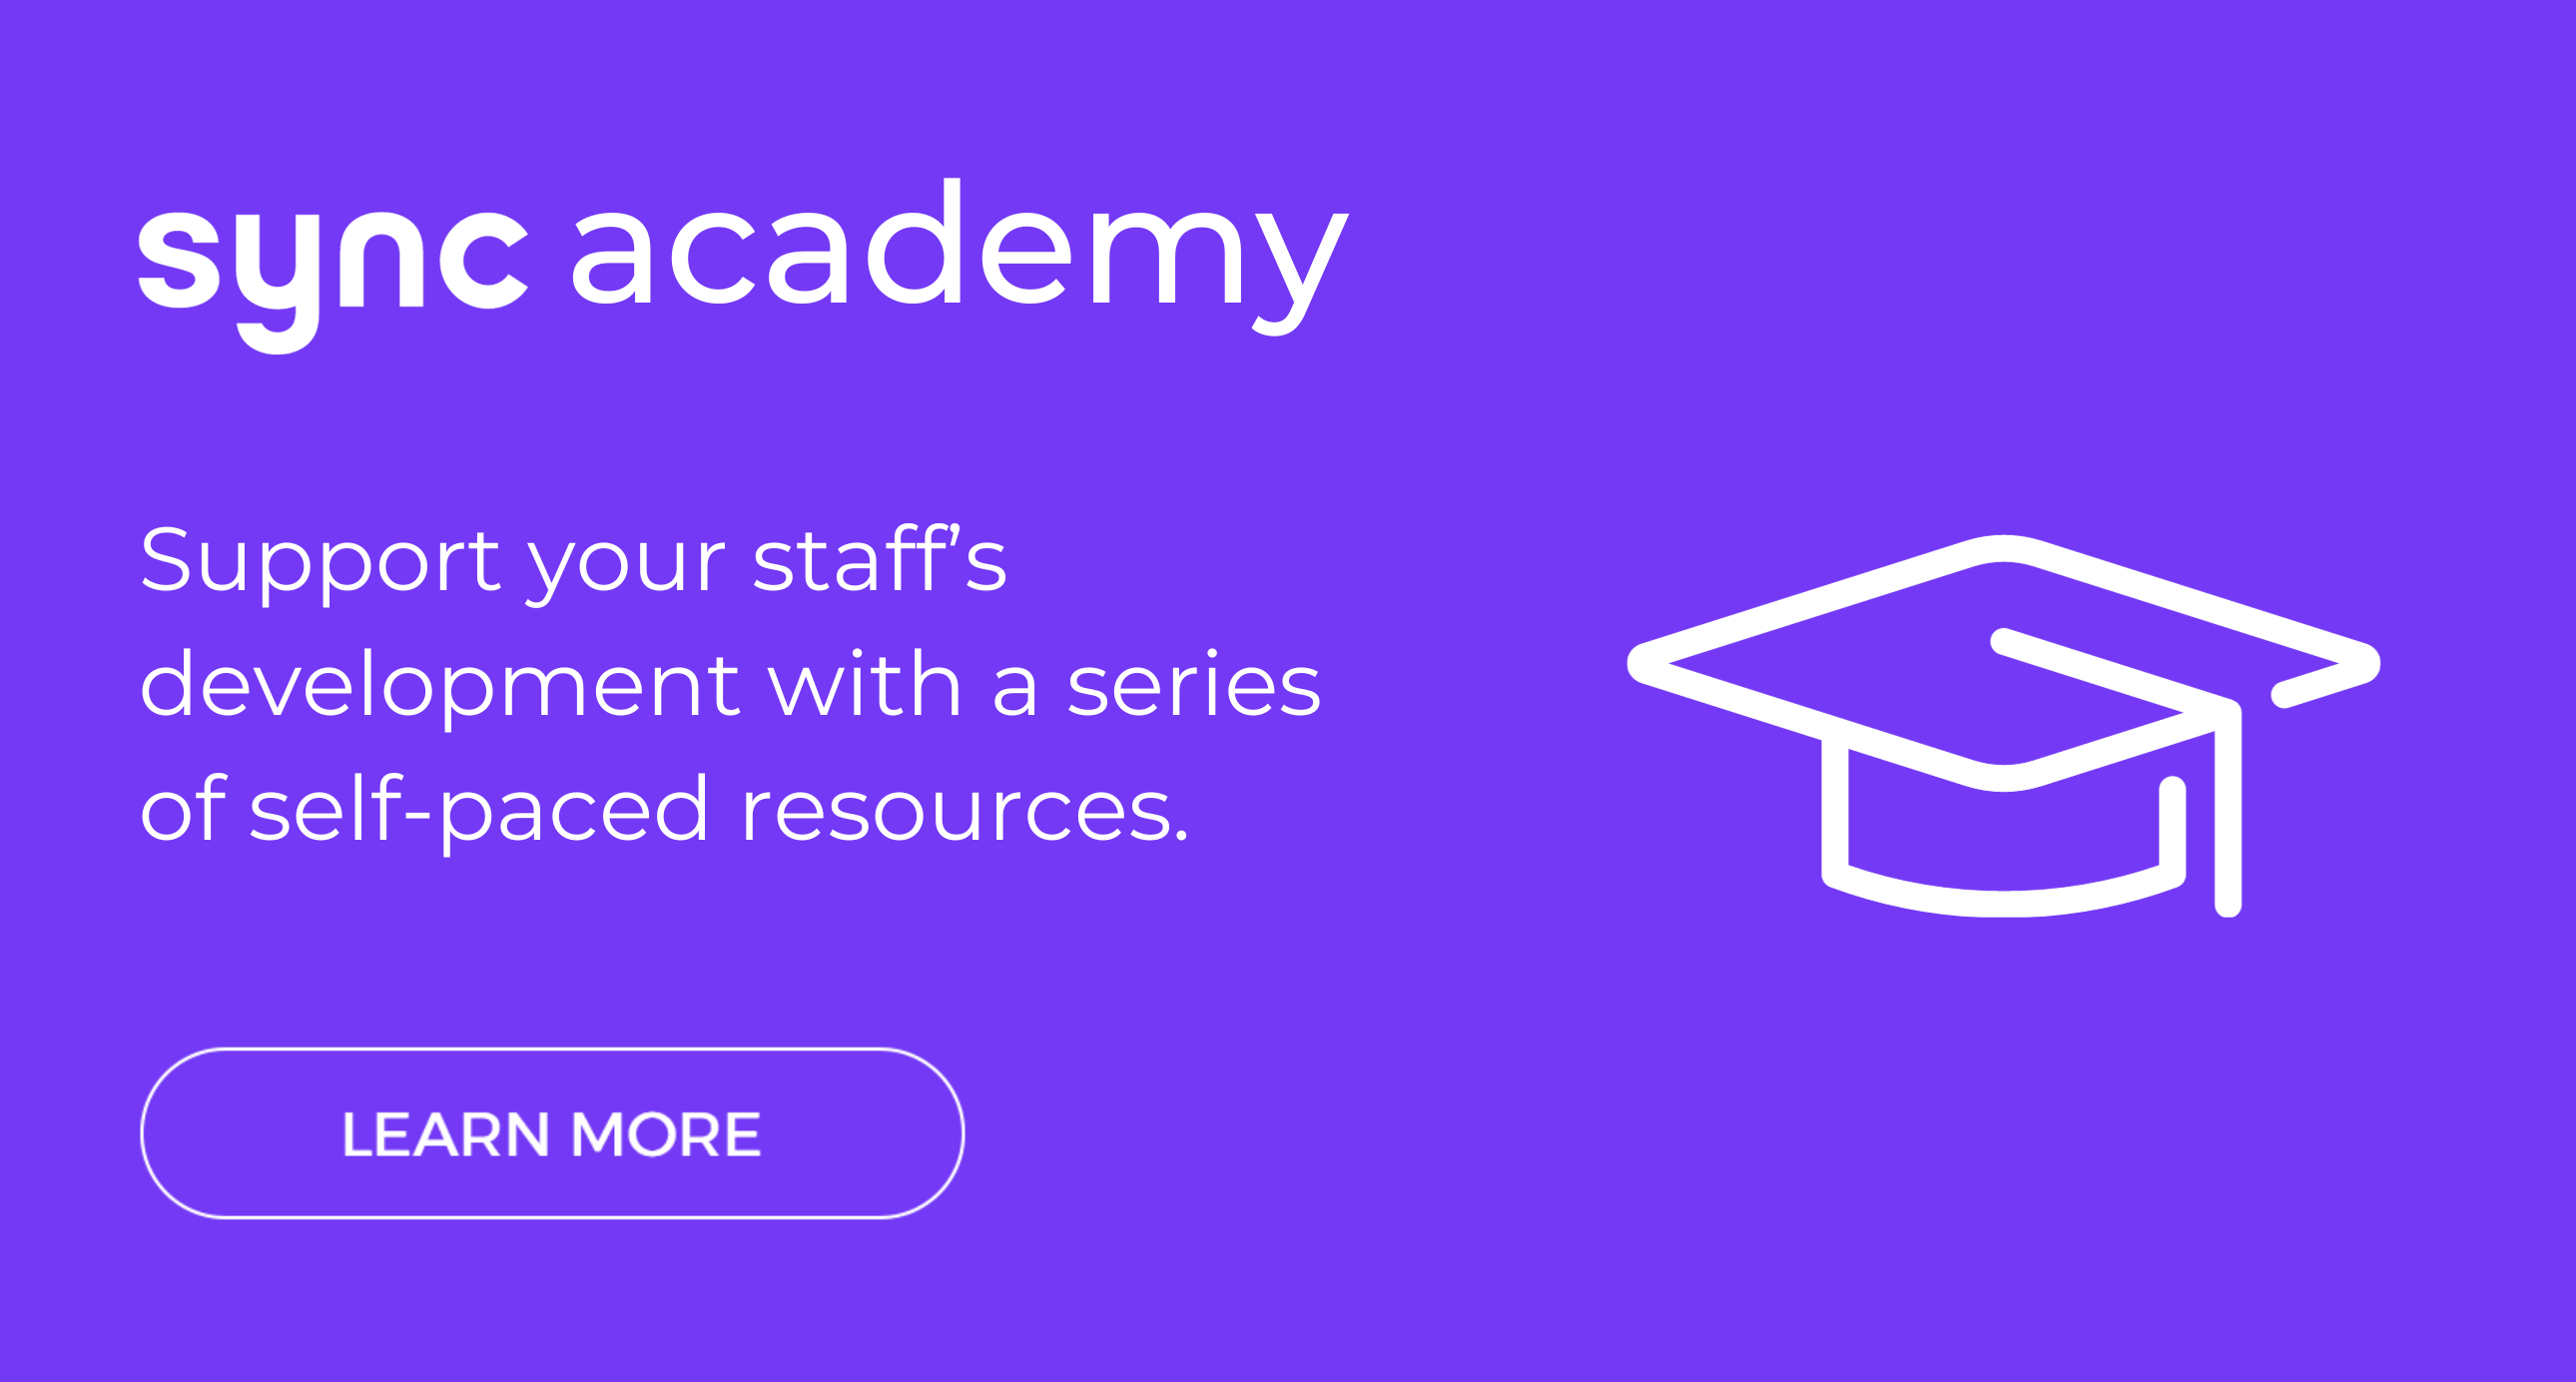 Sync Academy. Support your staff's development with a series of self-paced resources. Learn more.